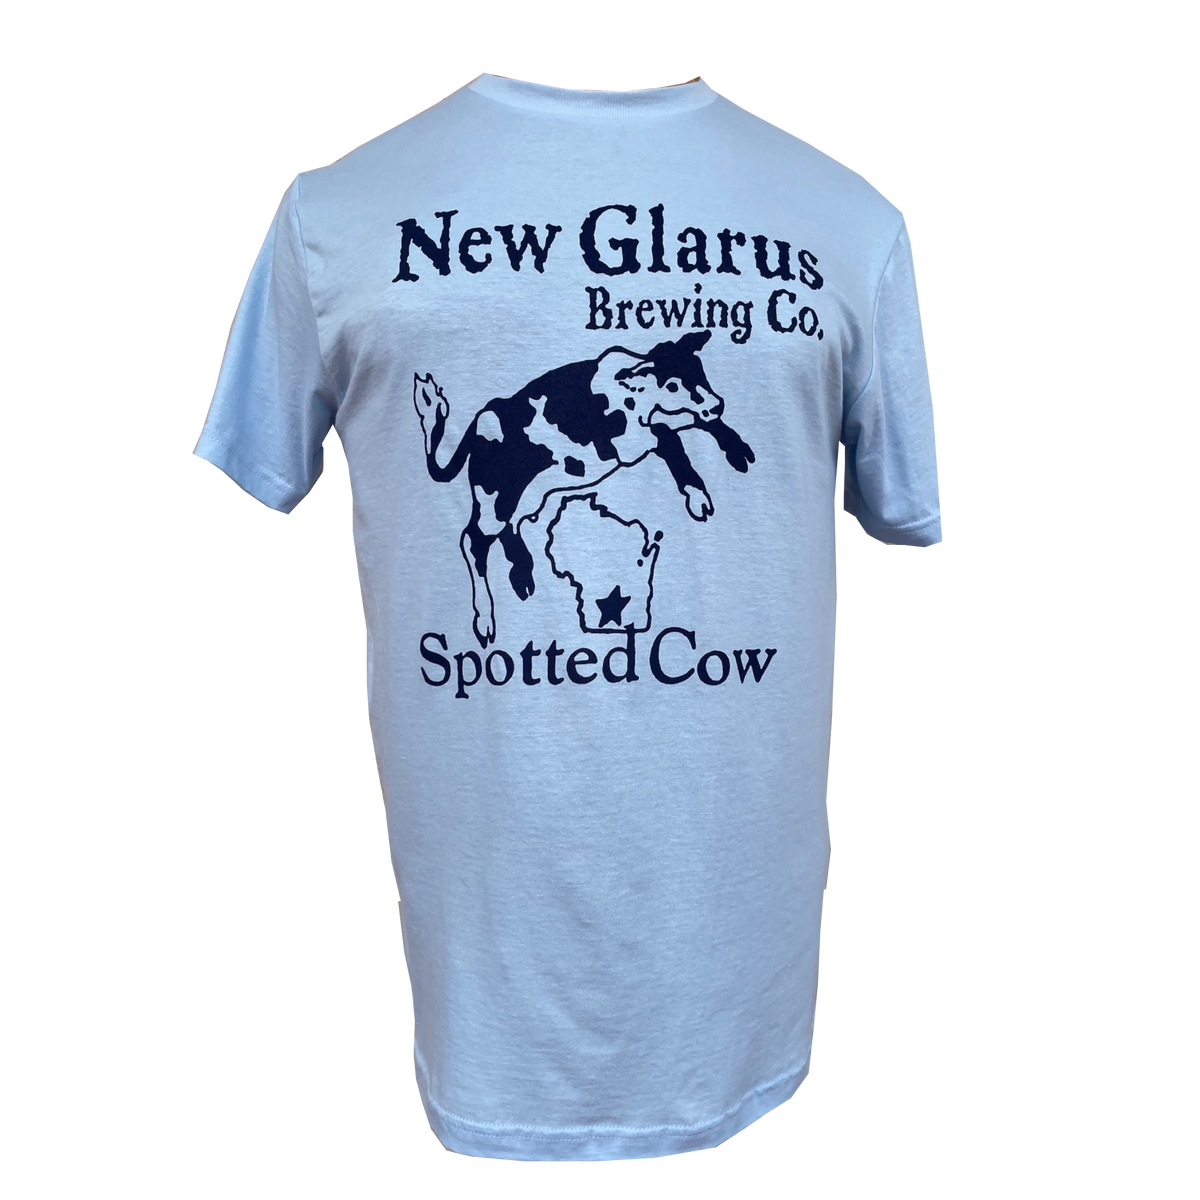 Light blue t-shirt with New Glarus Brewing Co. Spotted Cow logo in navy ink on the front.